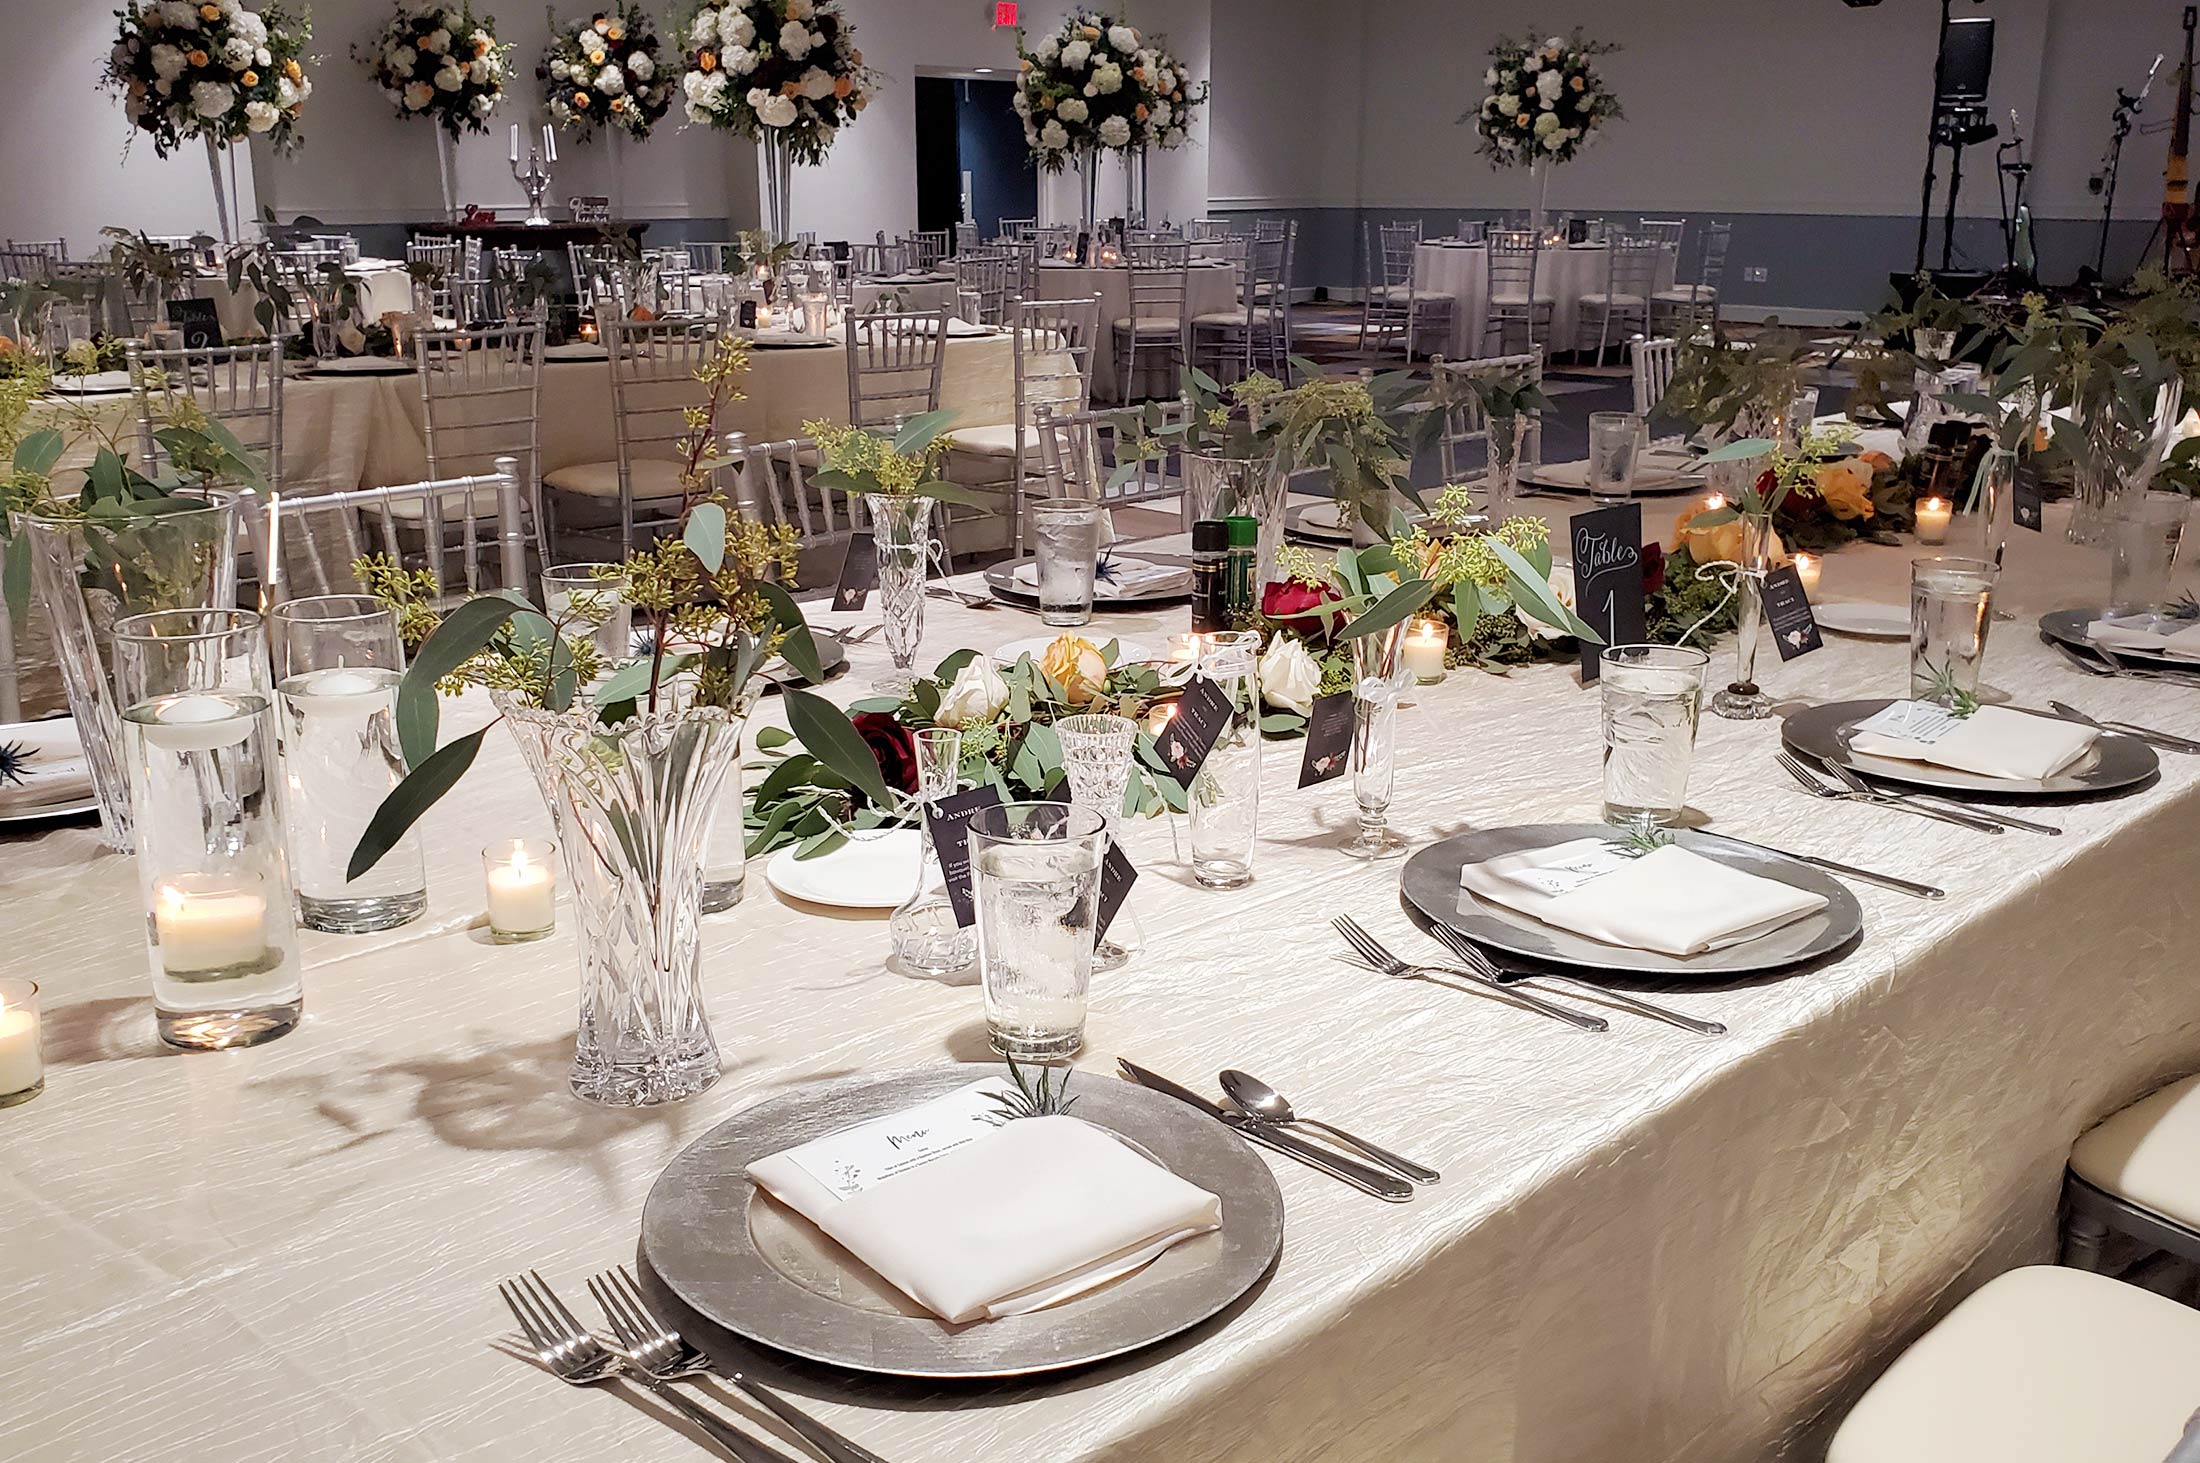 Reception in Monarch Ballroom, place settings